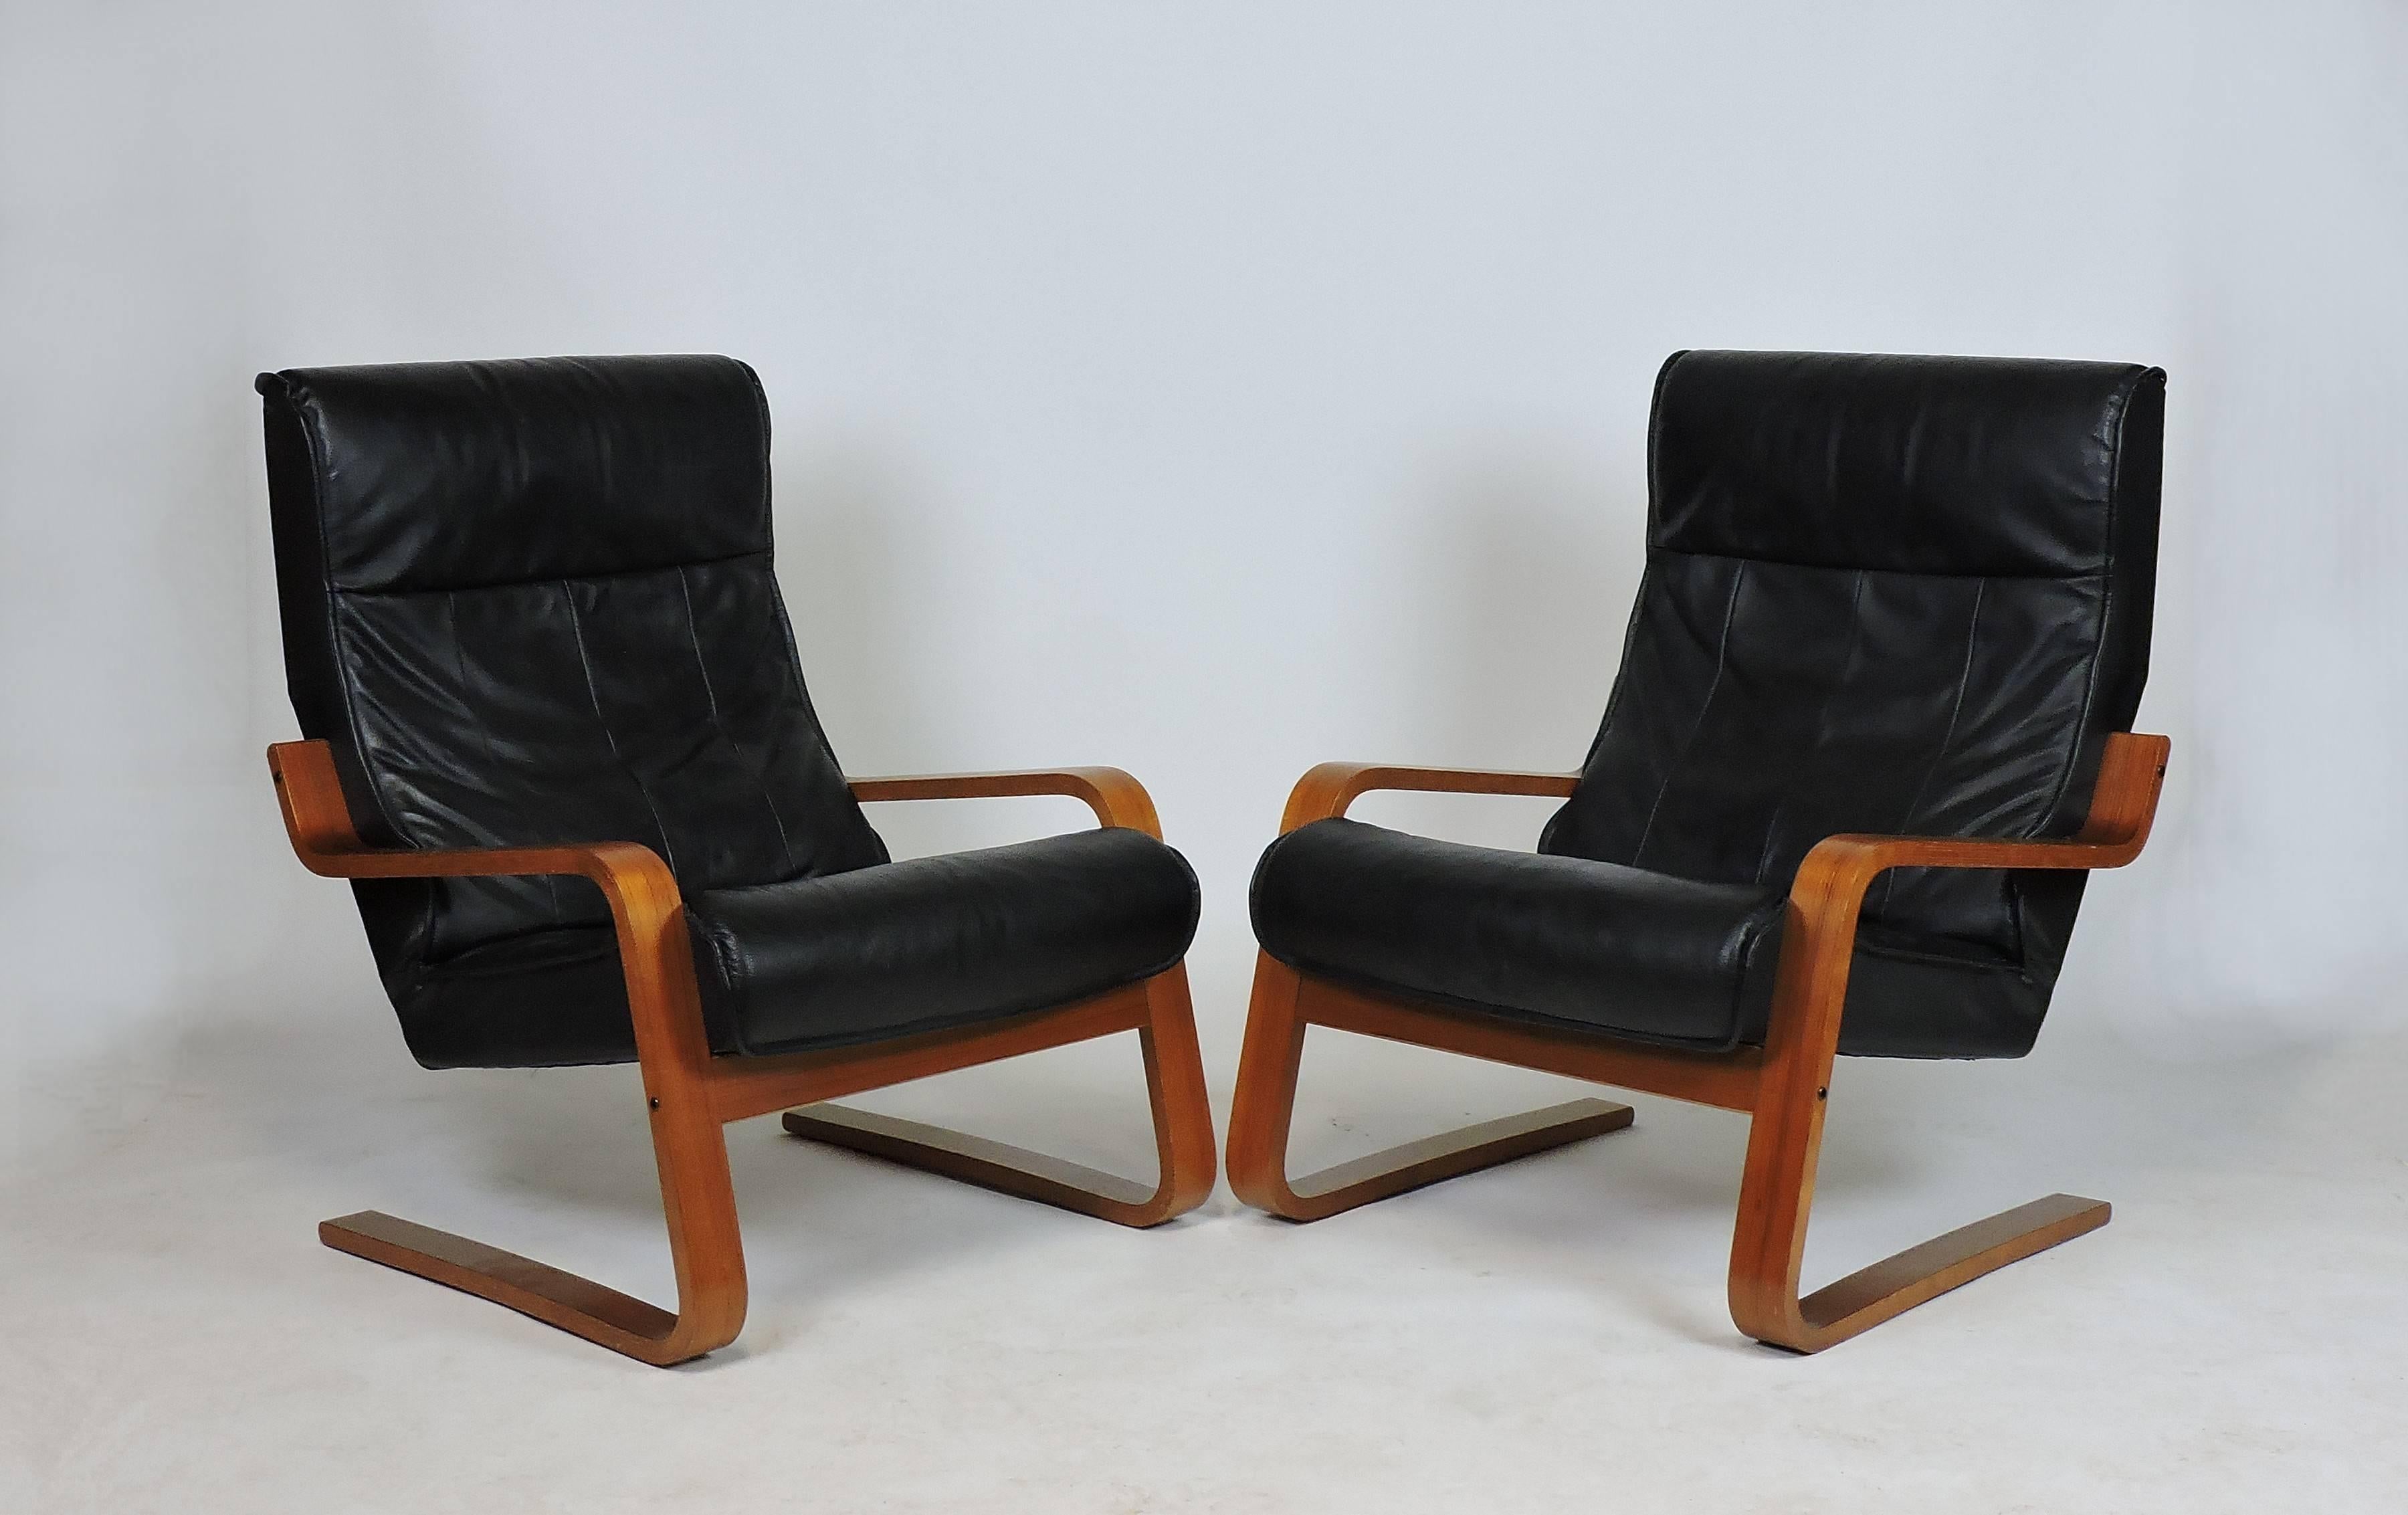 Pair of Danish Modern Alvar Aalto Style Cantilevered Teak Leather Lounge Chairs 3